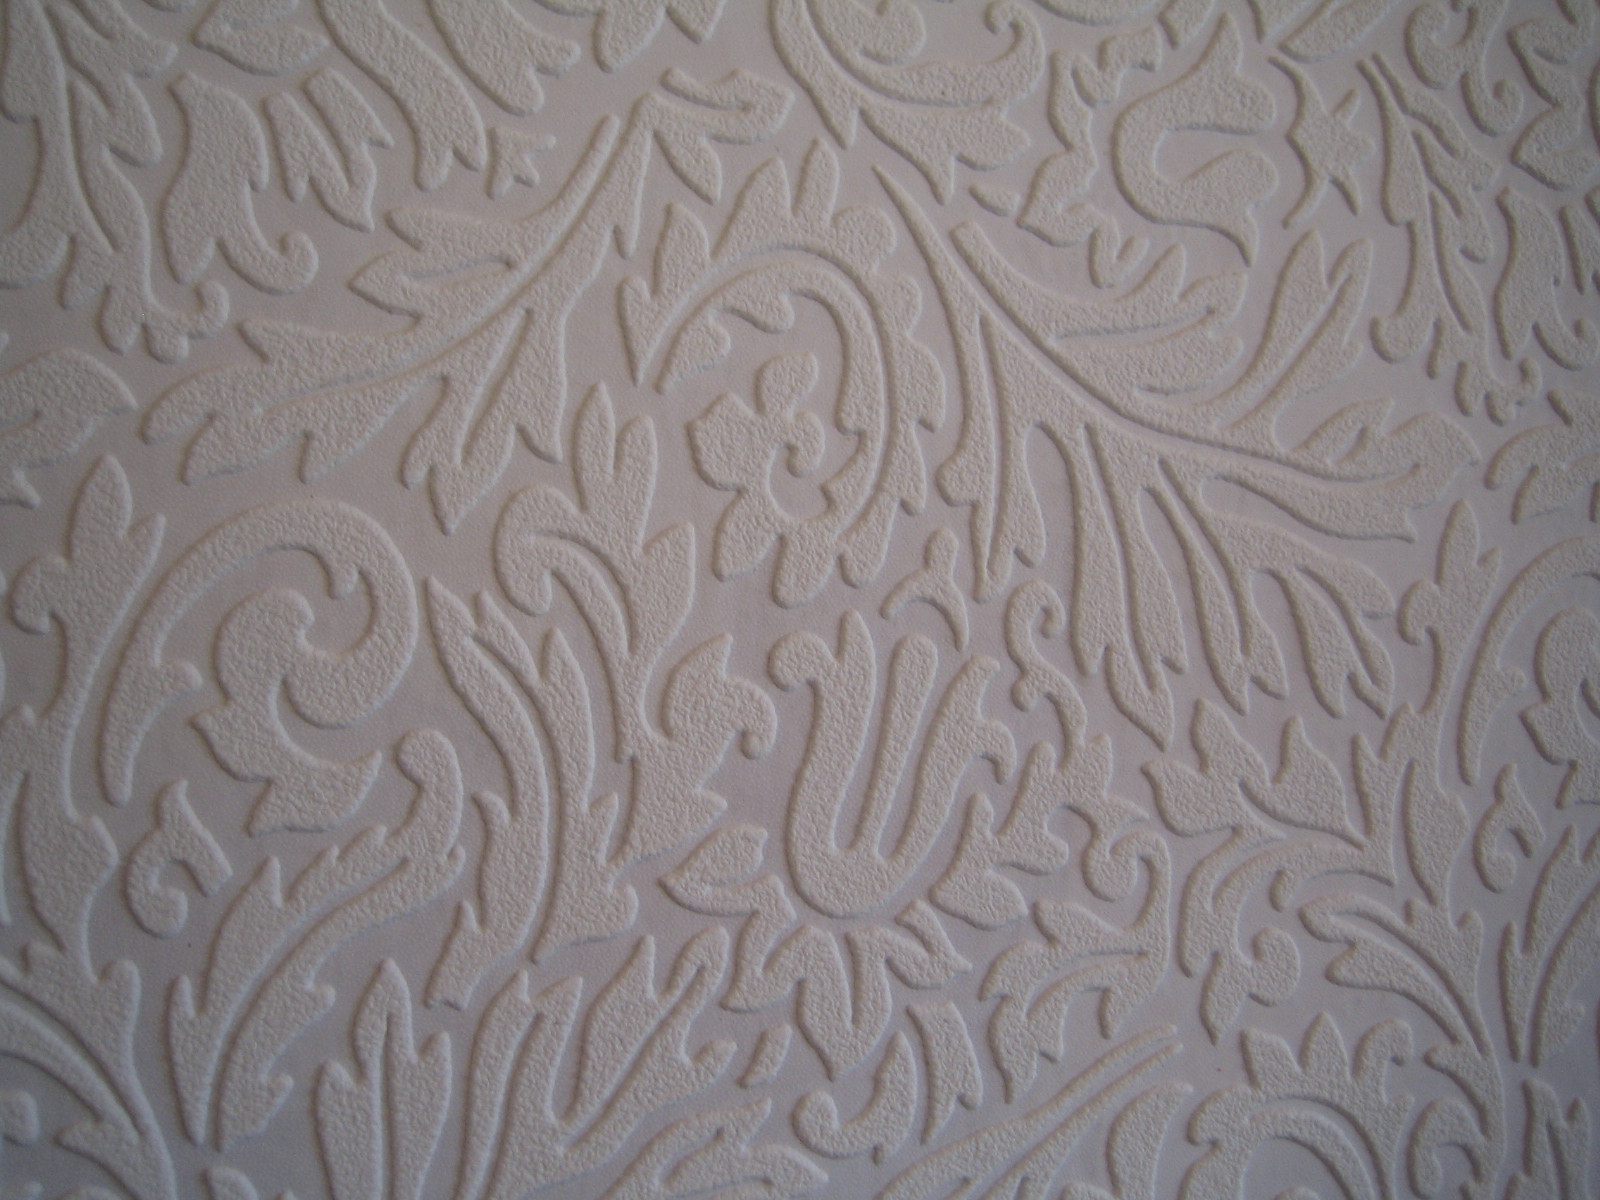 Texture So You Don T Think We Re Nuts For Putting Up White Wall Paper